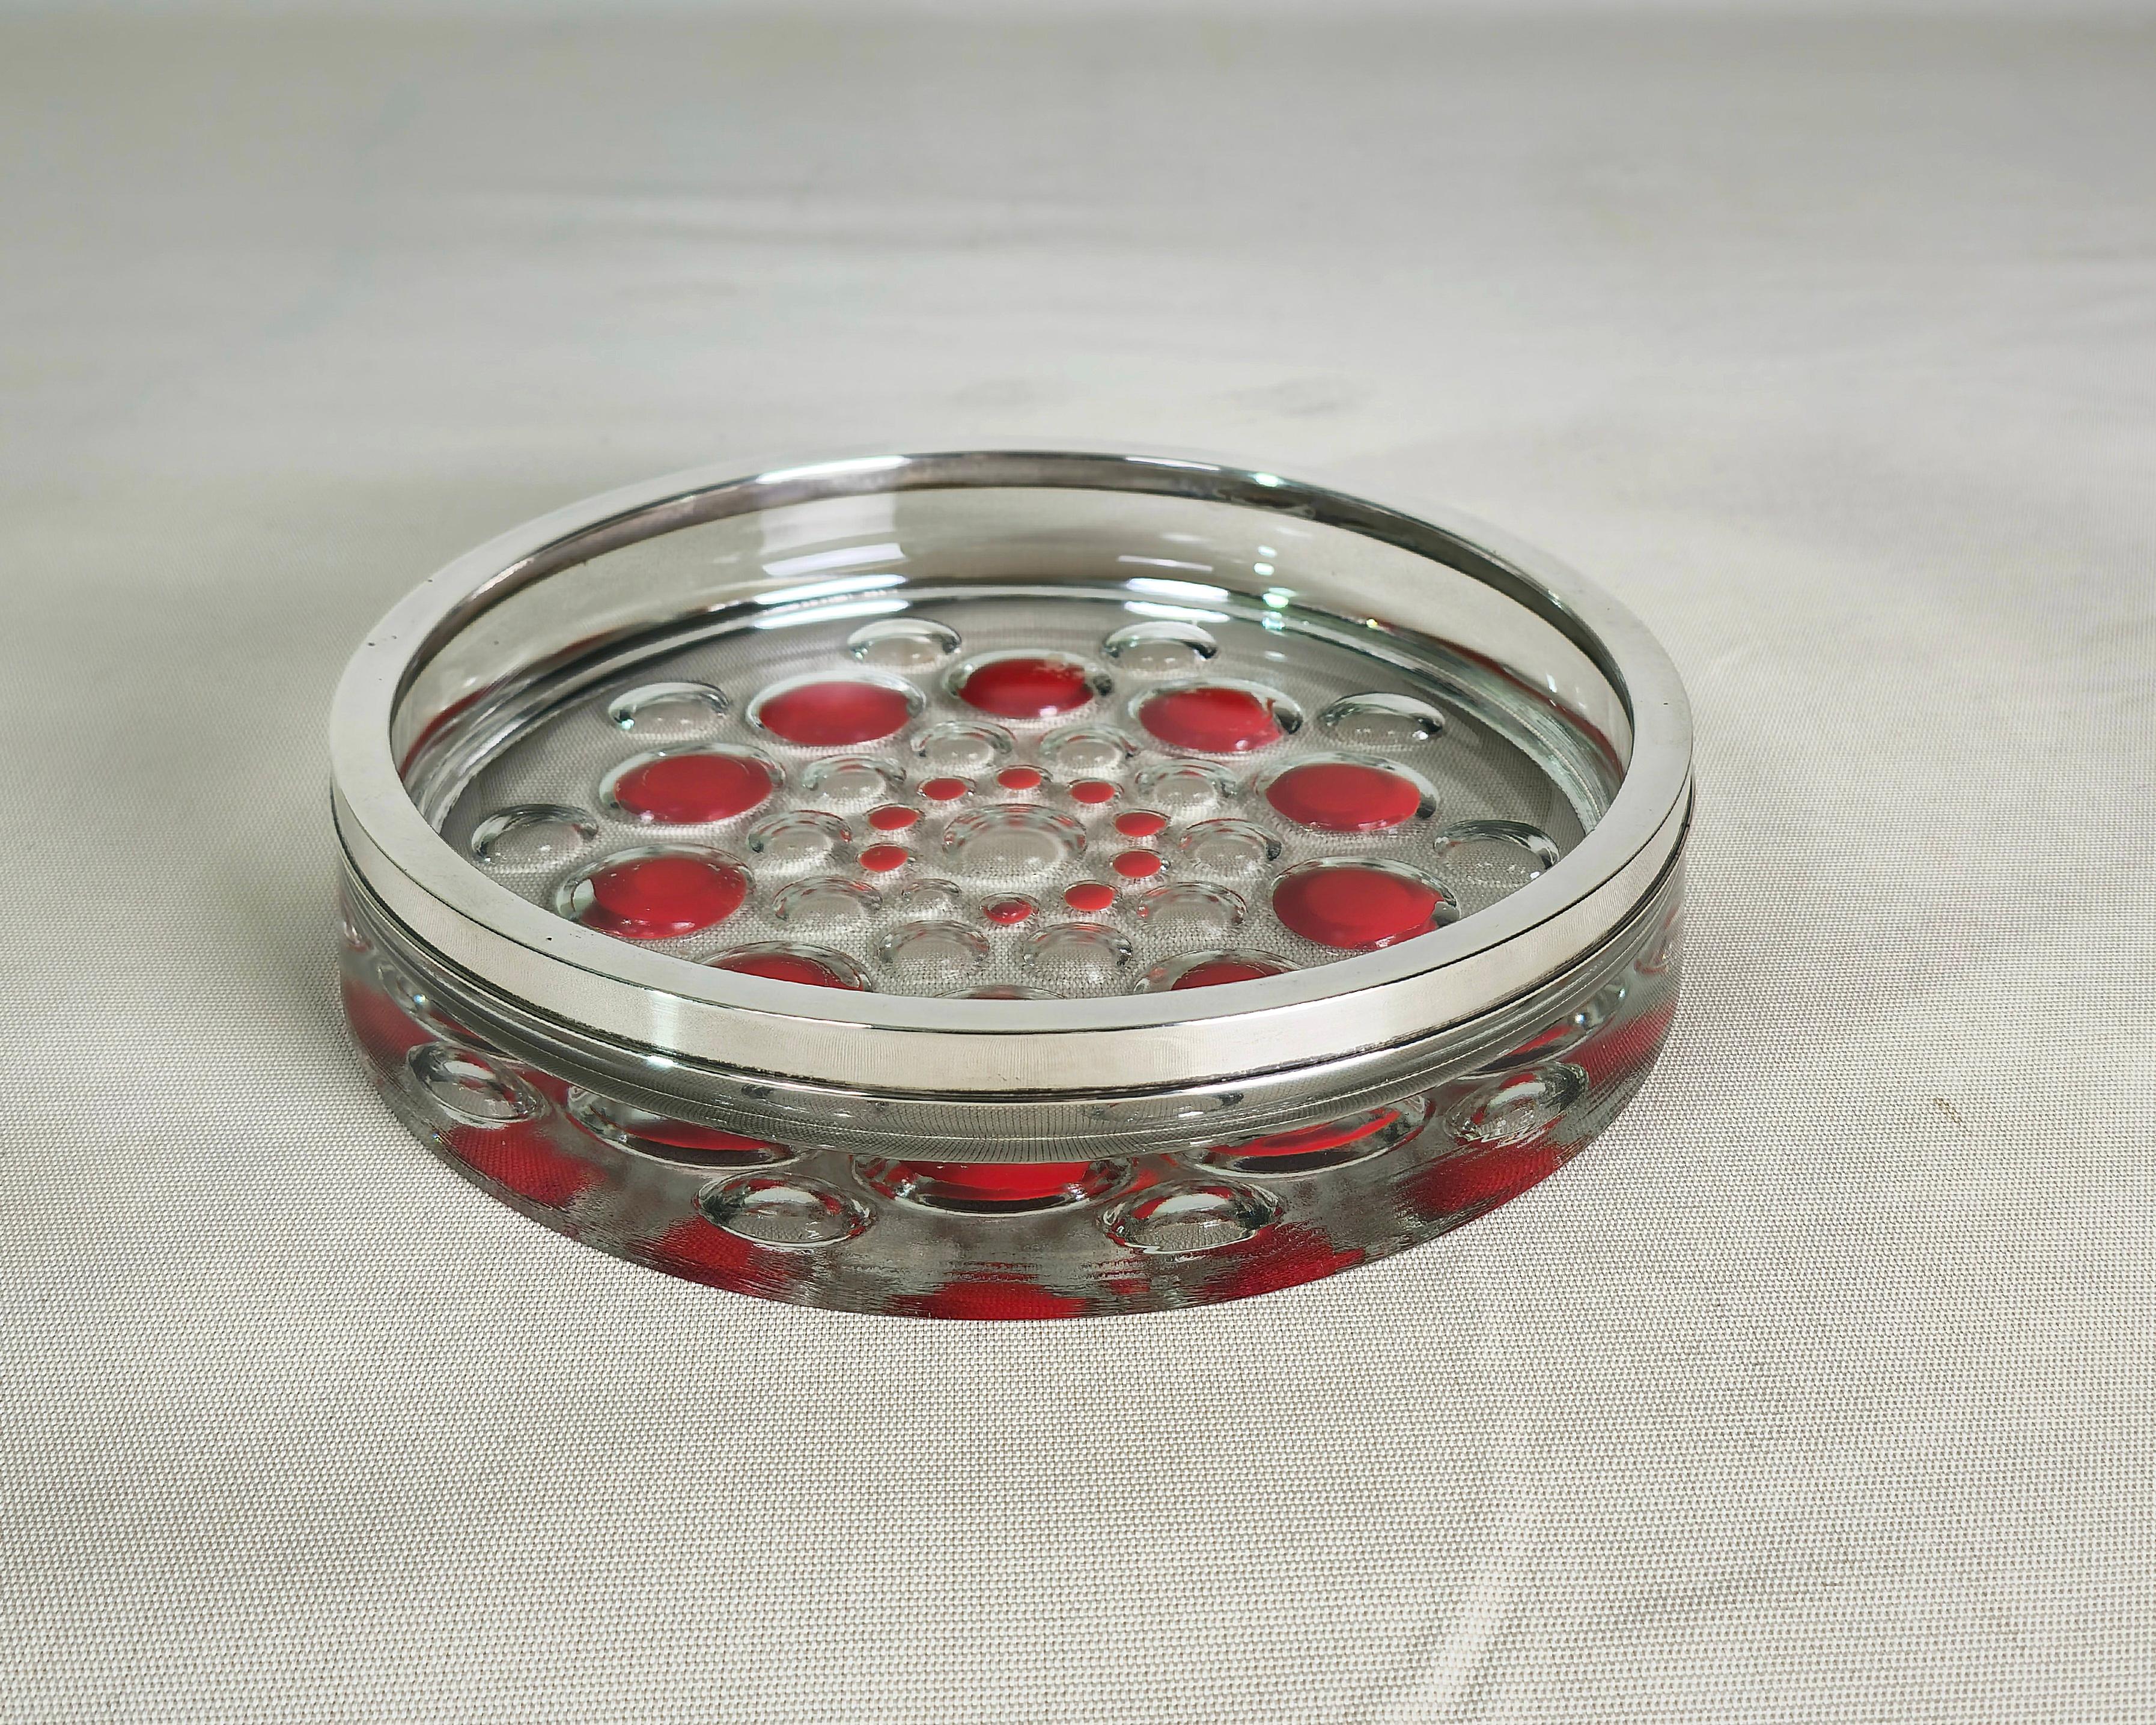 Circular vide-poche made of transparent glass with red bubble decorations and border covered in 925 silver as per the stamp. Italy of the 70s.



Note: We try to offer our customers an excellent service even in shipments all over the world,